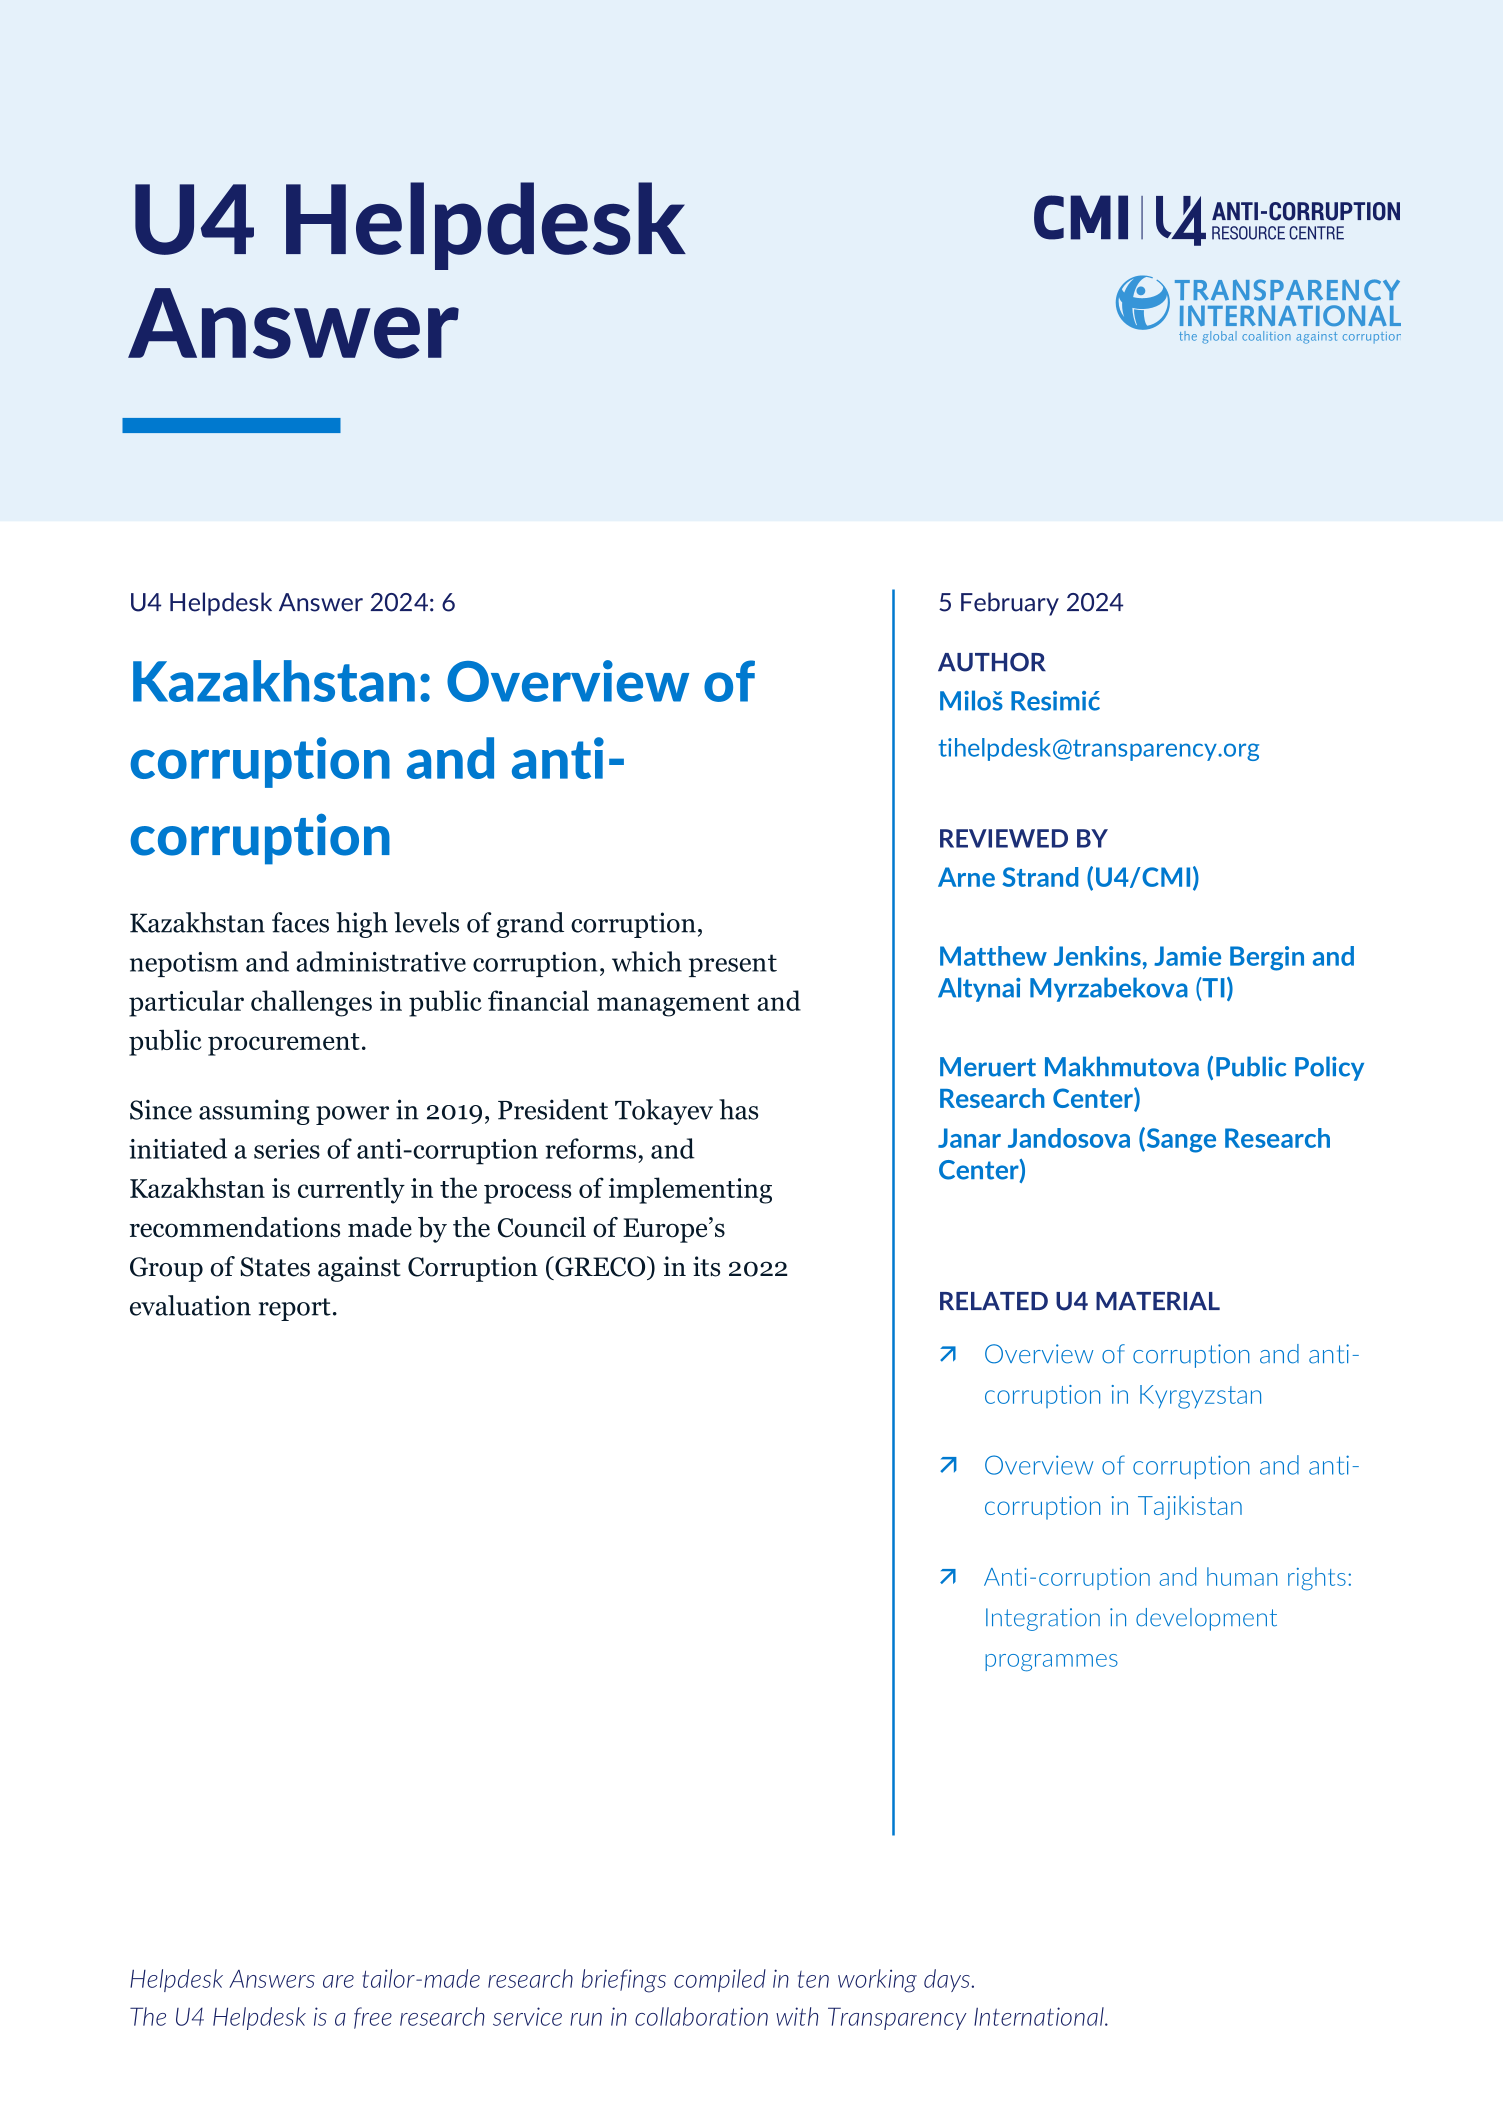 Kazakhstan: Overview of corruption and anti-corruption